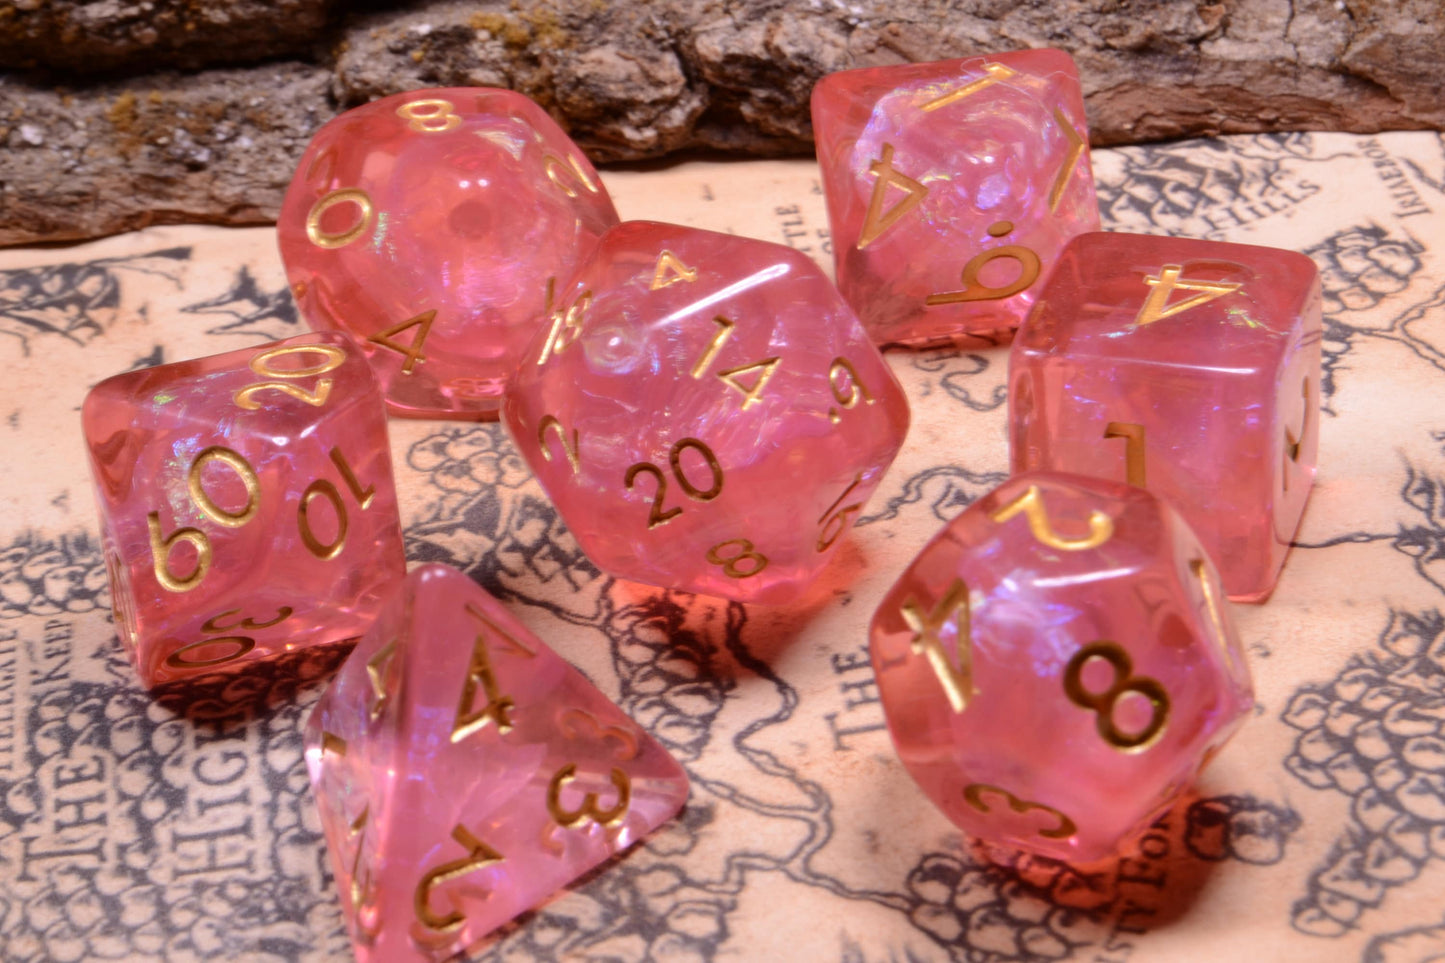 Ethereal Fae - Pink/Orange/Red/Purple Soft Edge Resin D&D Dice Set With Gold Numbering - For Dungeons and Dragons - Gift Set